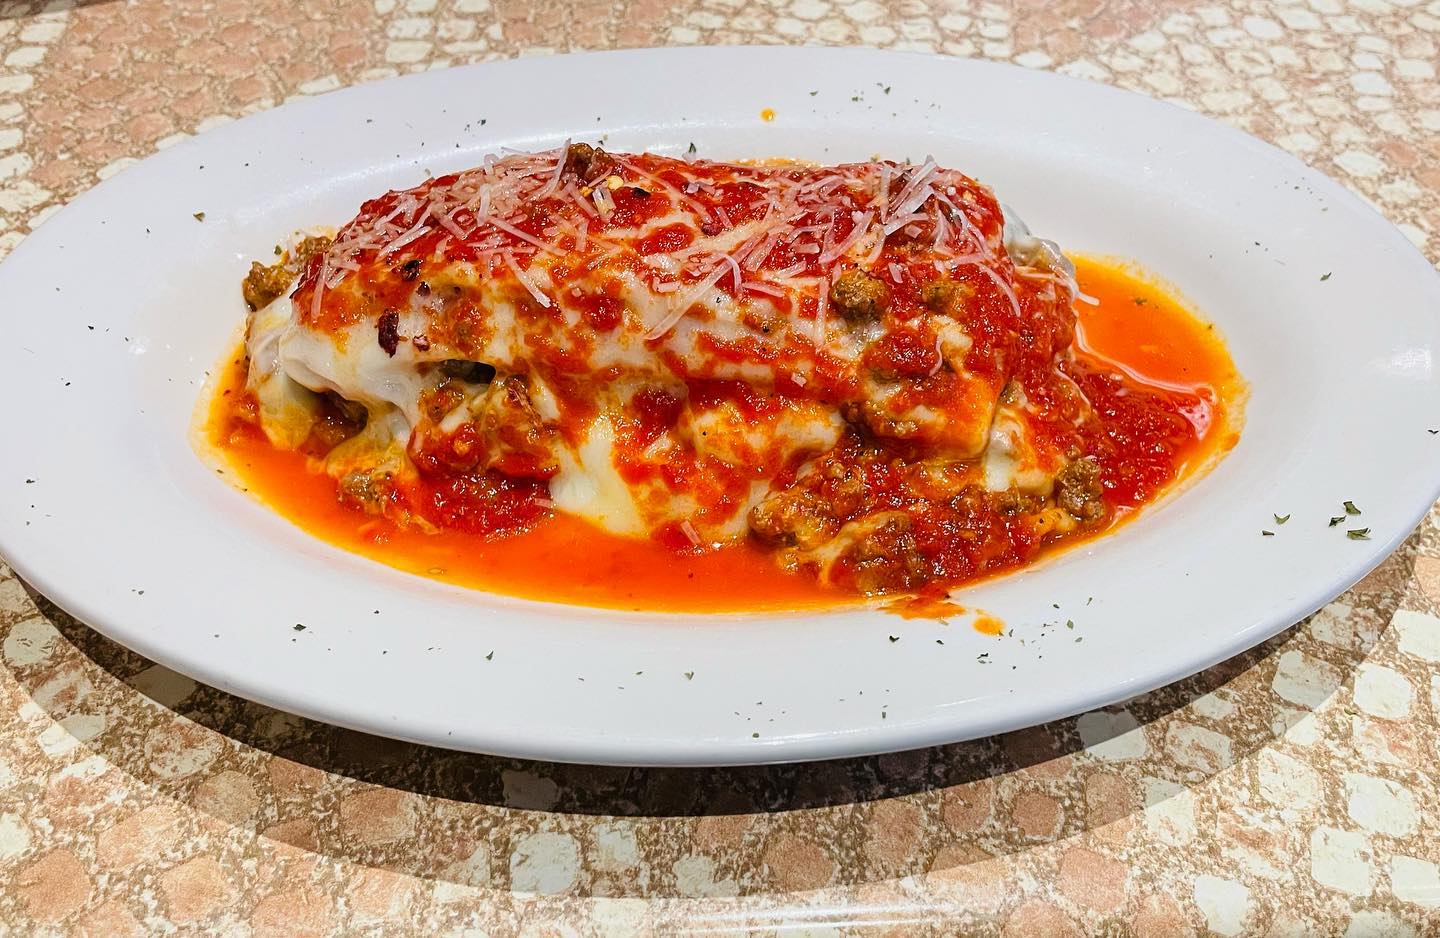 A plate of lasagna on a table with sauce on it.